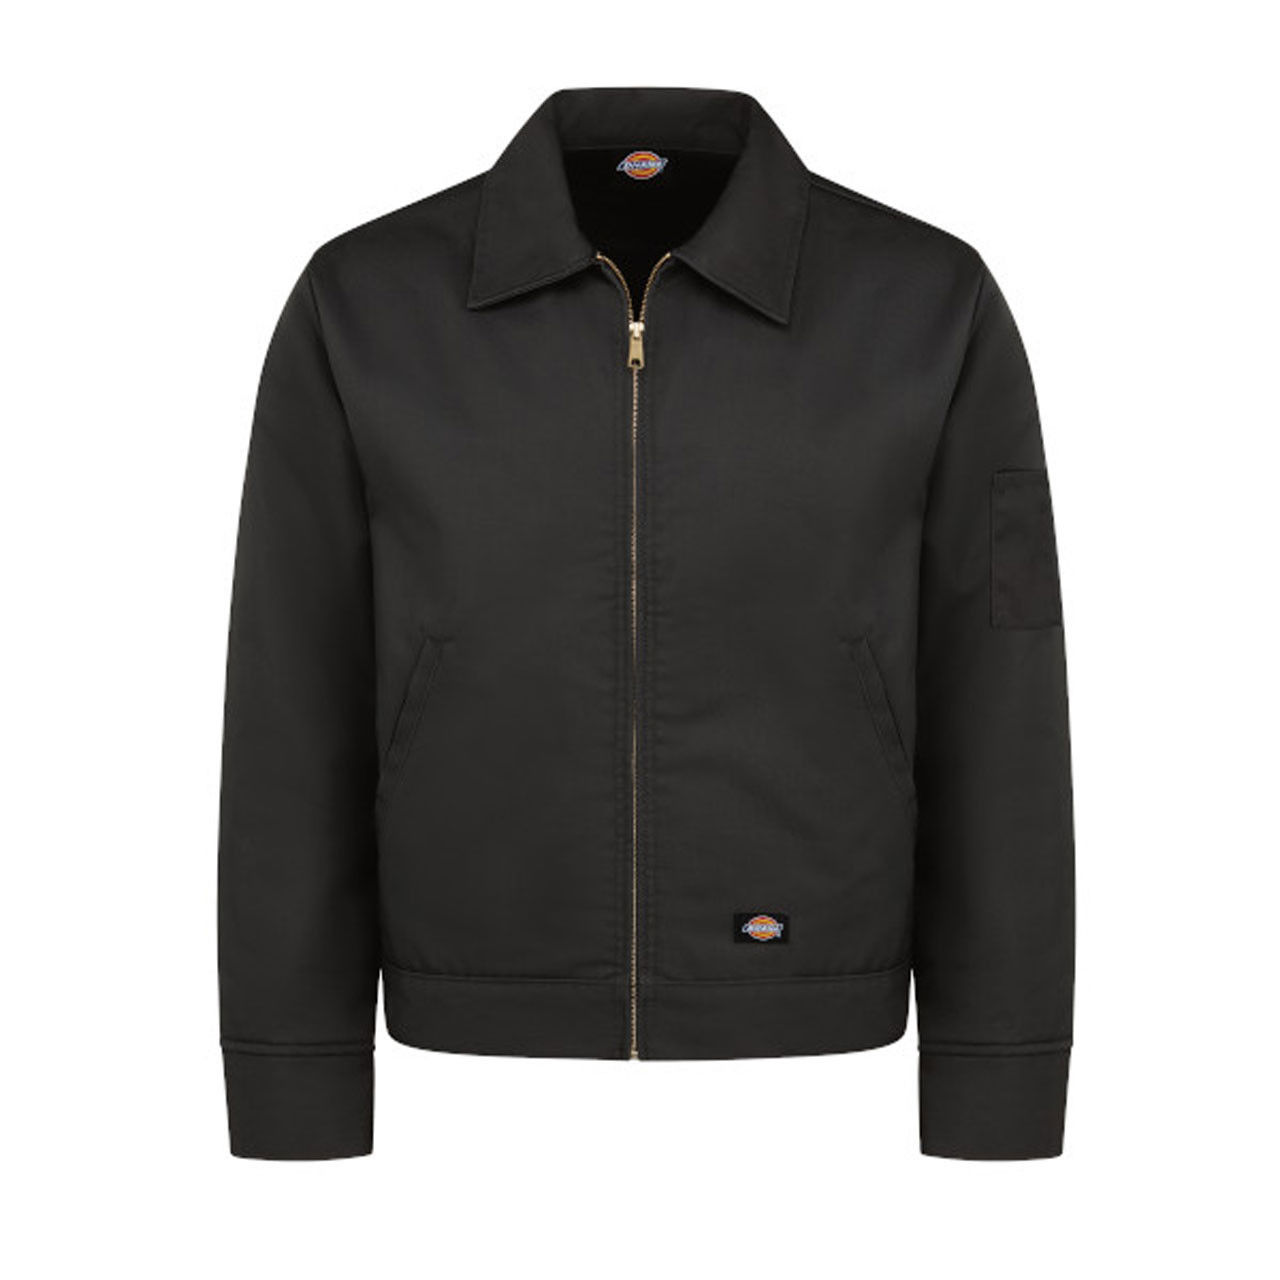 What materials make up the body and lining of this black Dickies jacket?